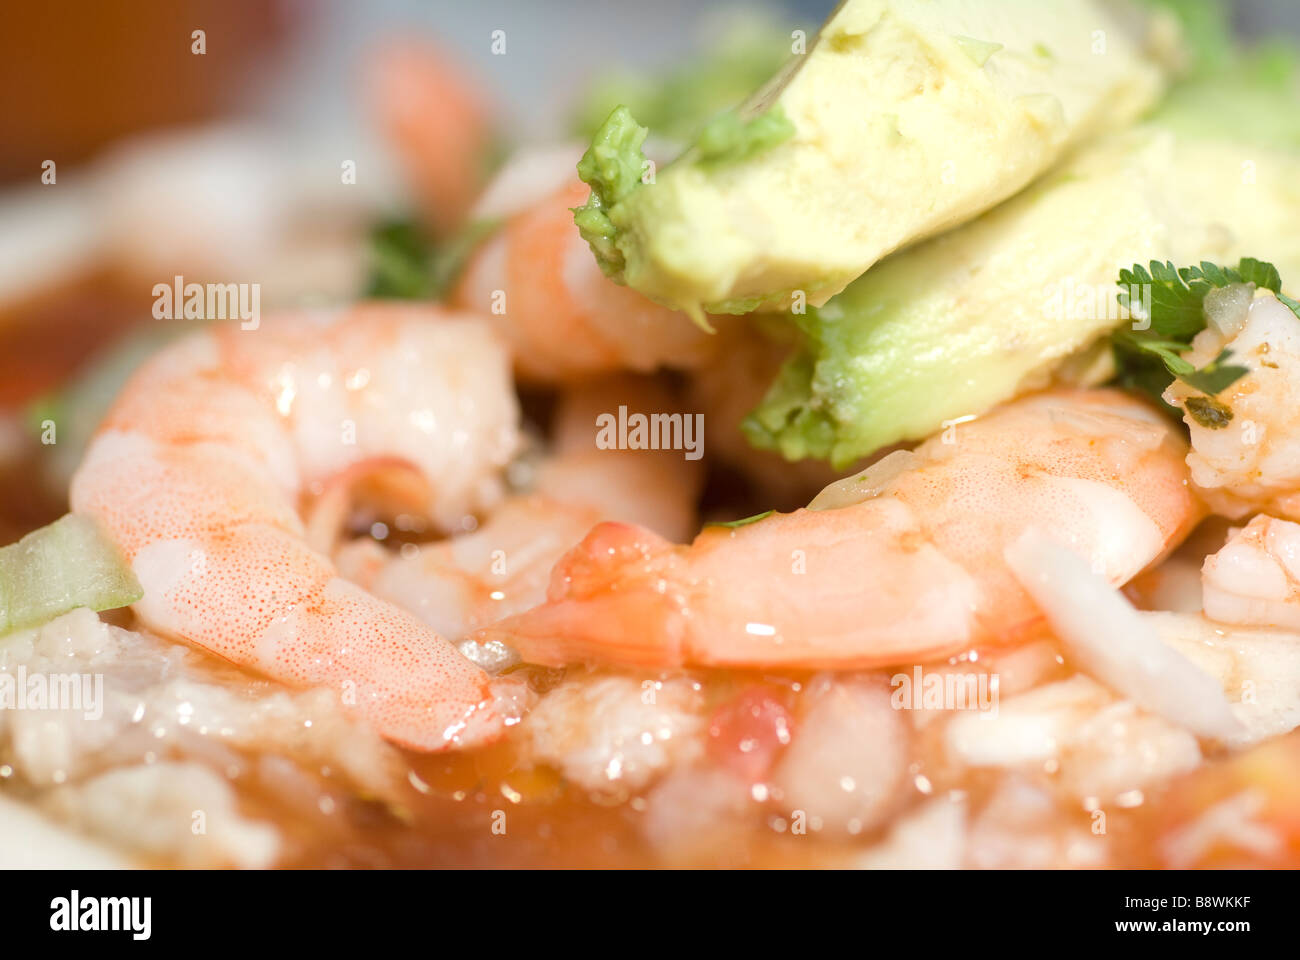 a mexican cuisine Stock Photo